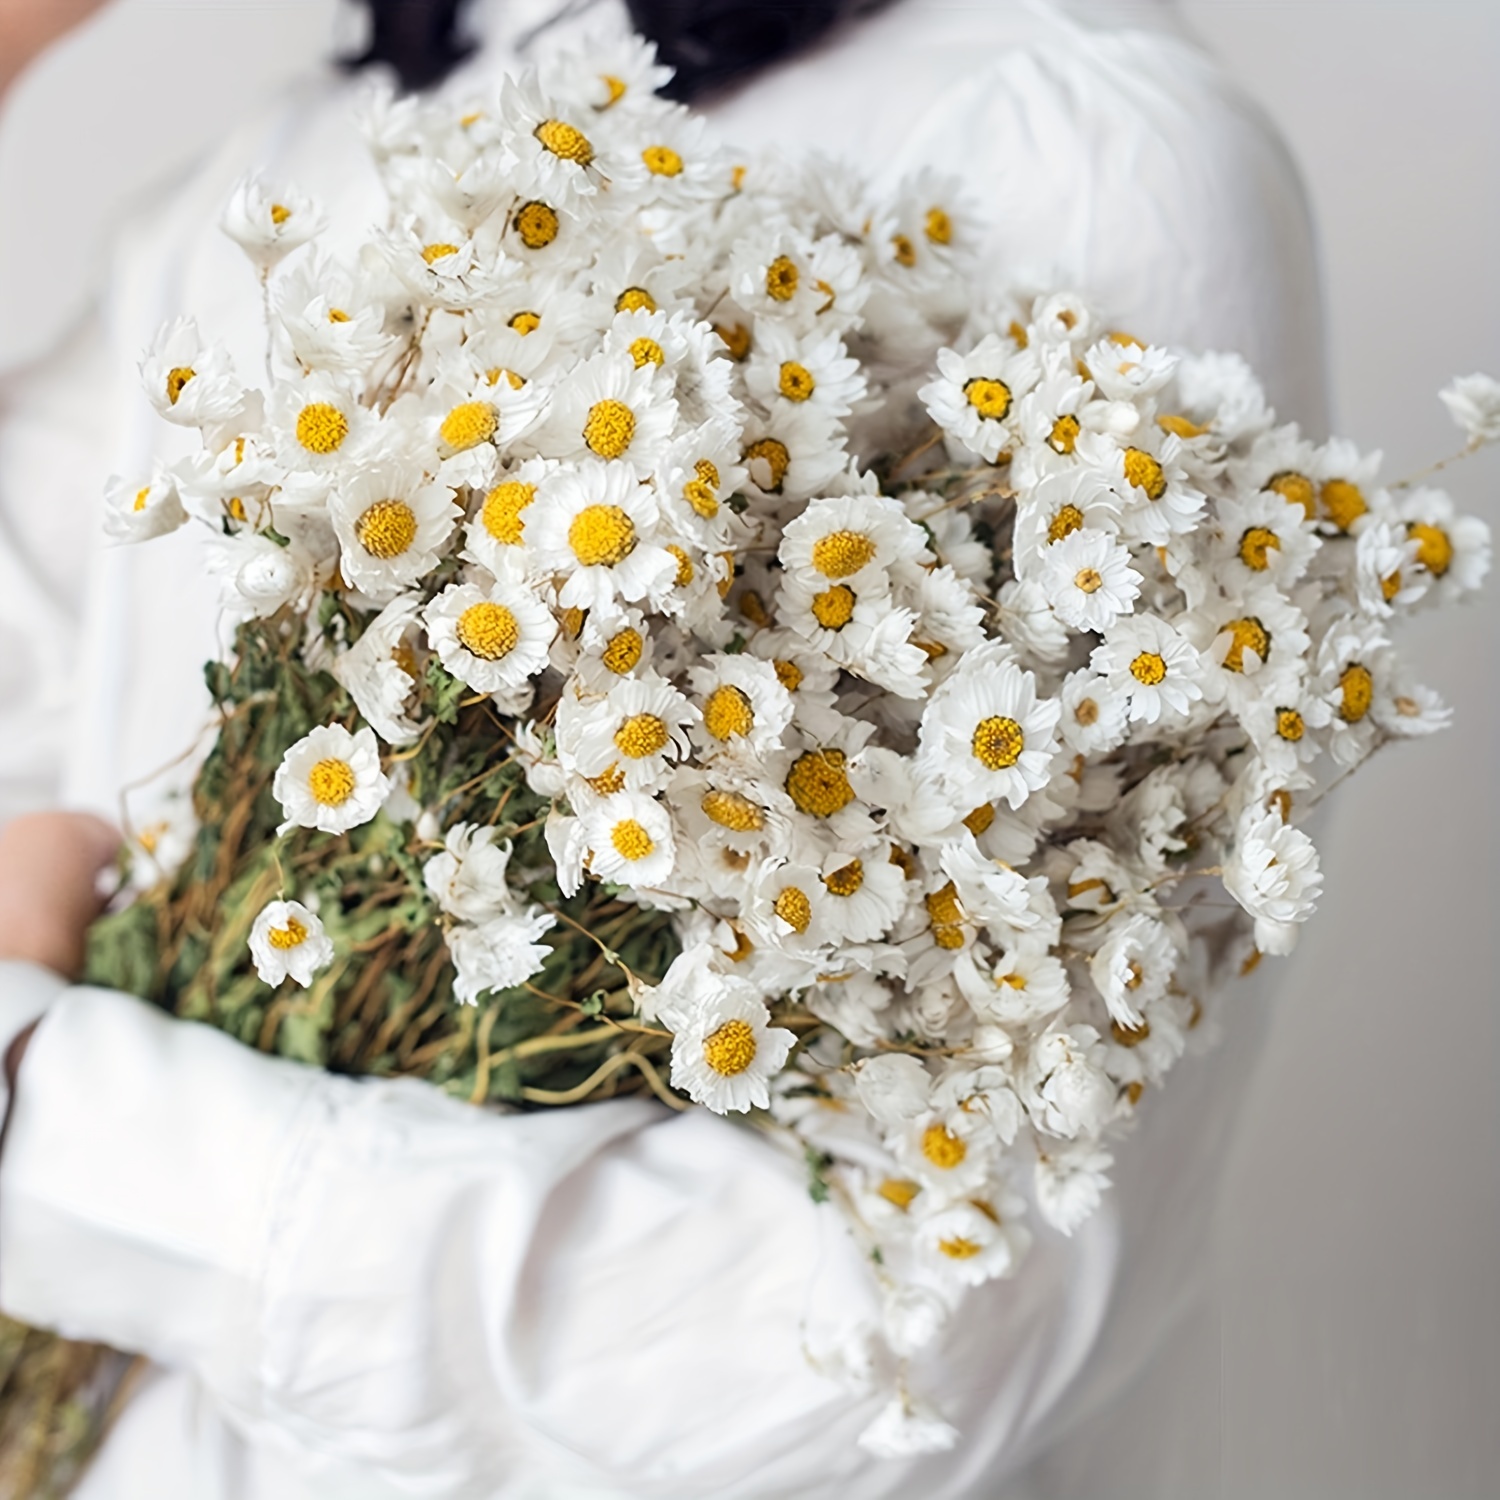 200 Stems Natural Dry Flowers Brazilian Small Star Daisy Decorative Dried Flowers Mini Daisy Chamomile Bouquet for Wedding Floral Arrangements Home